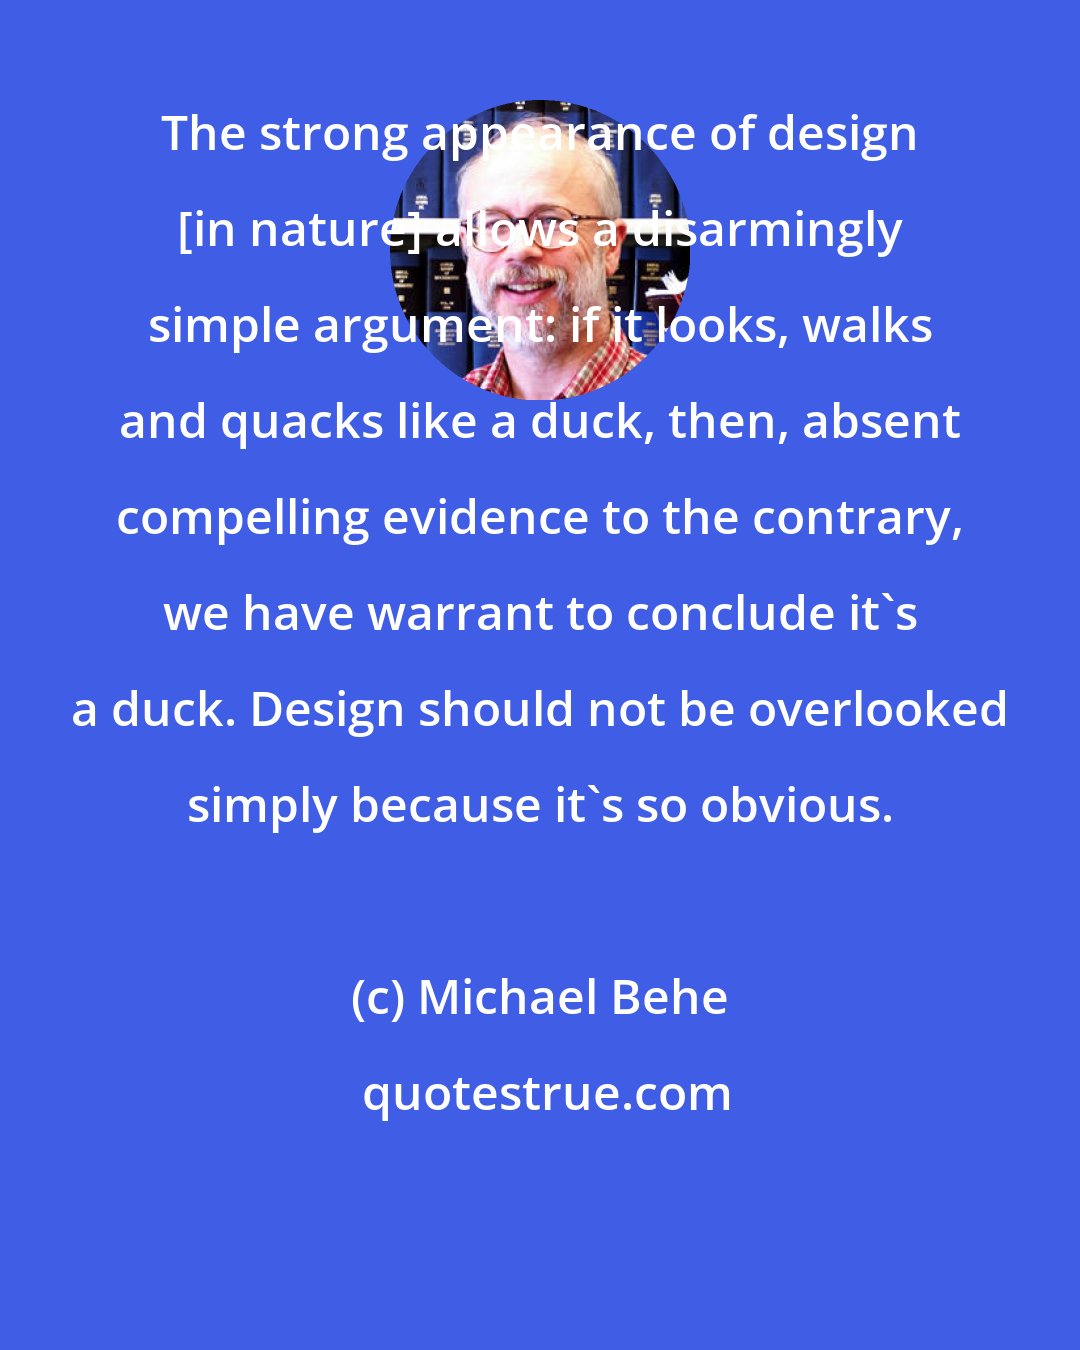 Michael Behe: The strong appearance of design [in nature] allows a disarmingly simple argument: if it looks, walks and quacks like a duck, then, absent compelling evidence to the contrary, we have warrant to conclude it's a duck. Design should not be overlooked simply because it's so obvious.